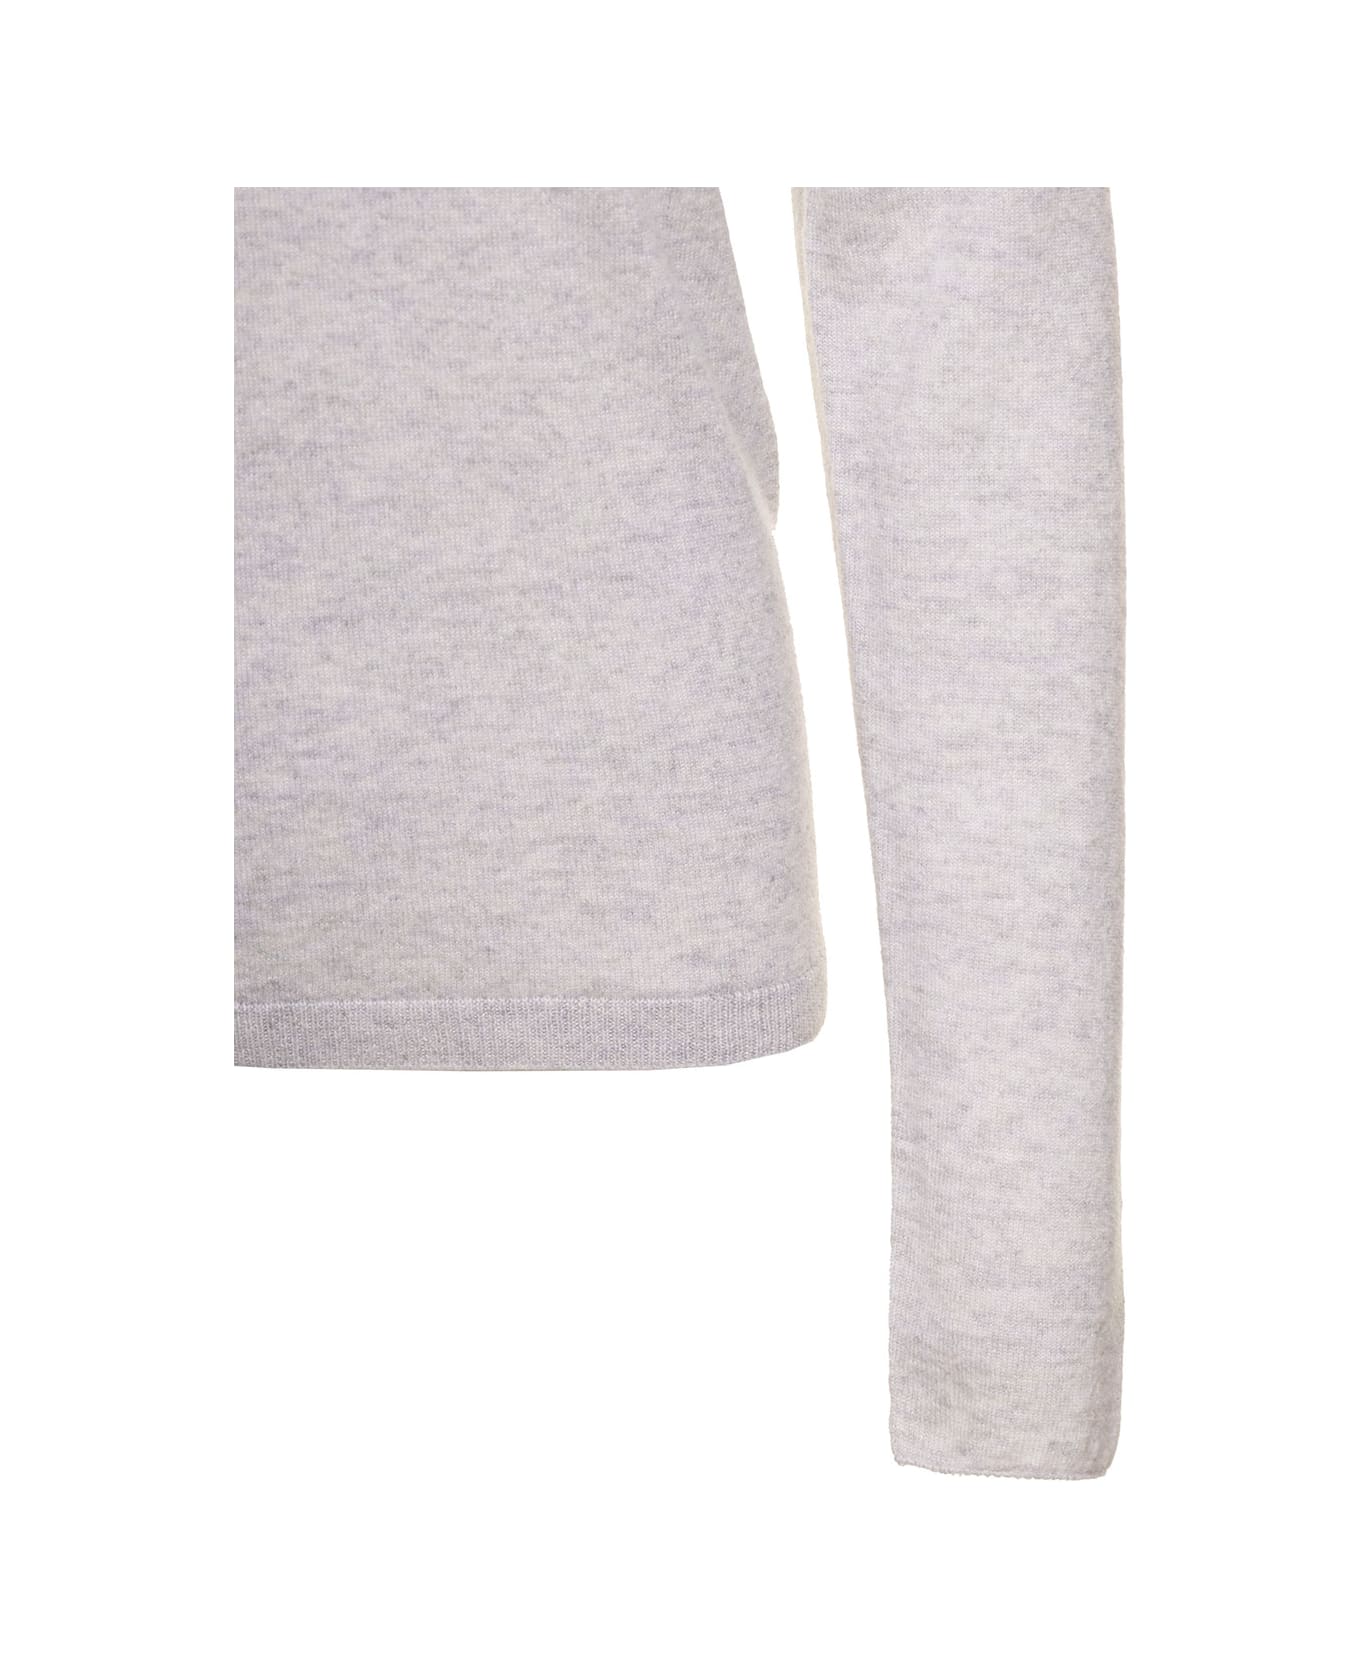 Antonelli Grey Sweater With V Neckline In Wool And Cashmere Woman - Grey